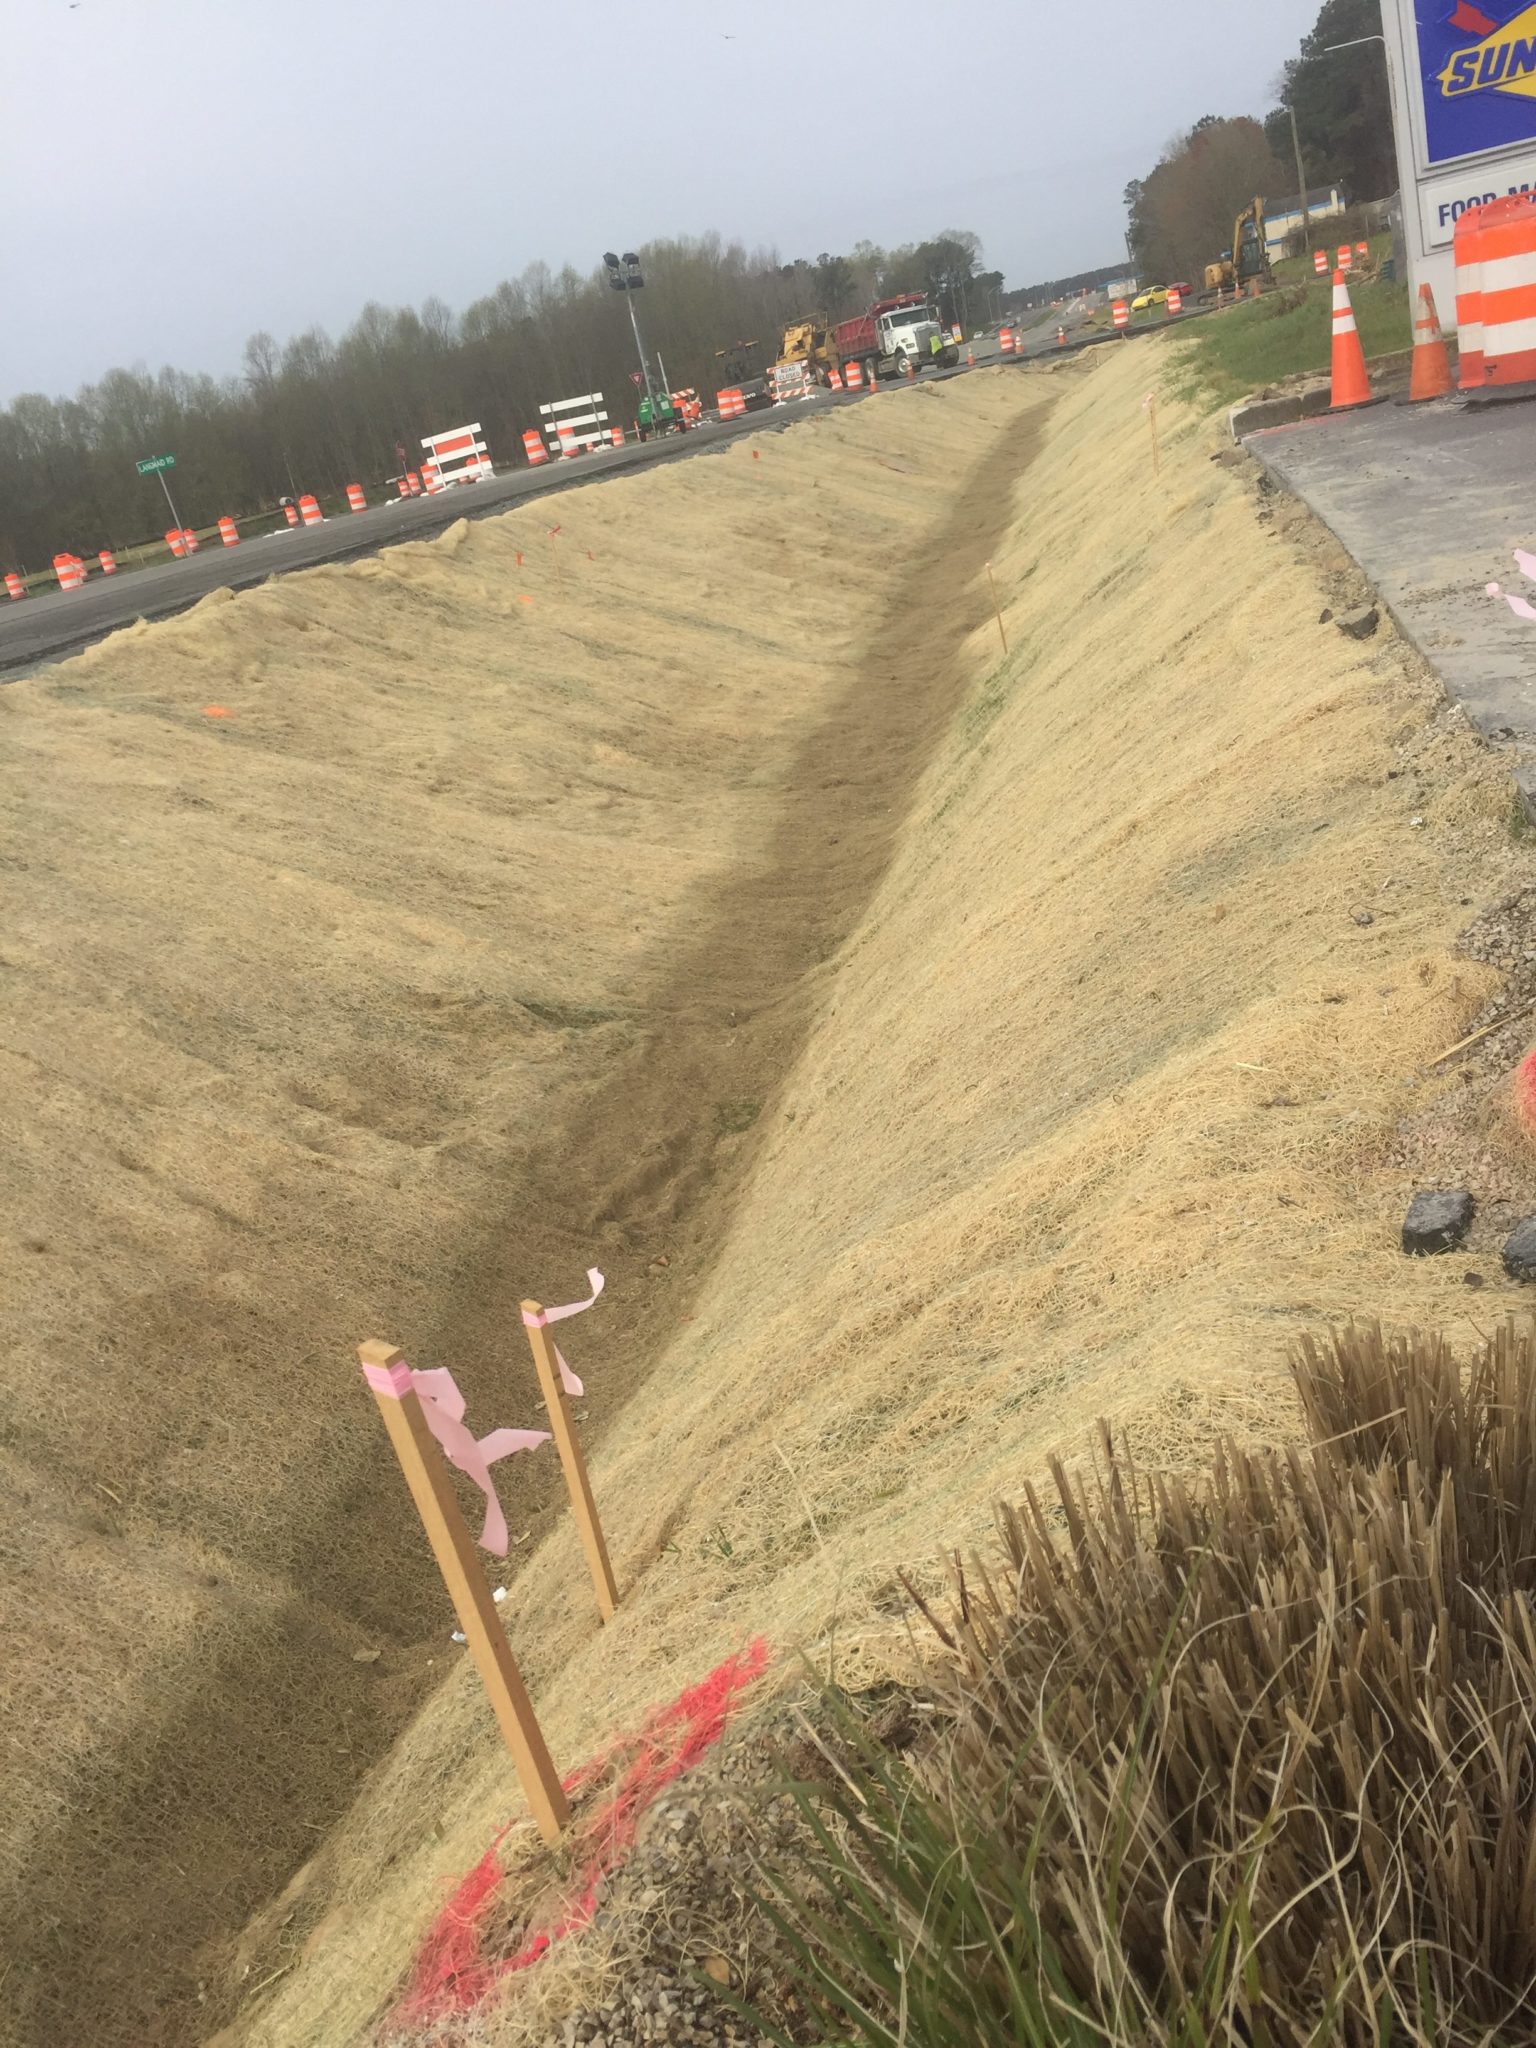 Erosion control blankets being used along a highway